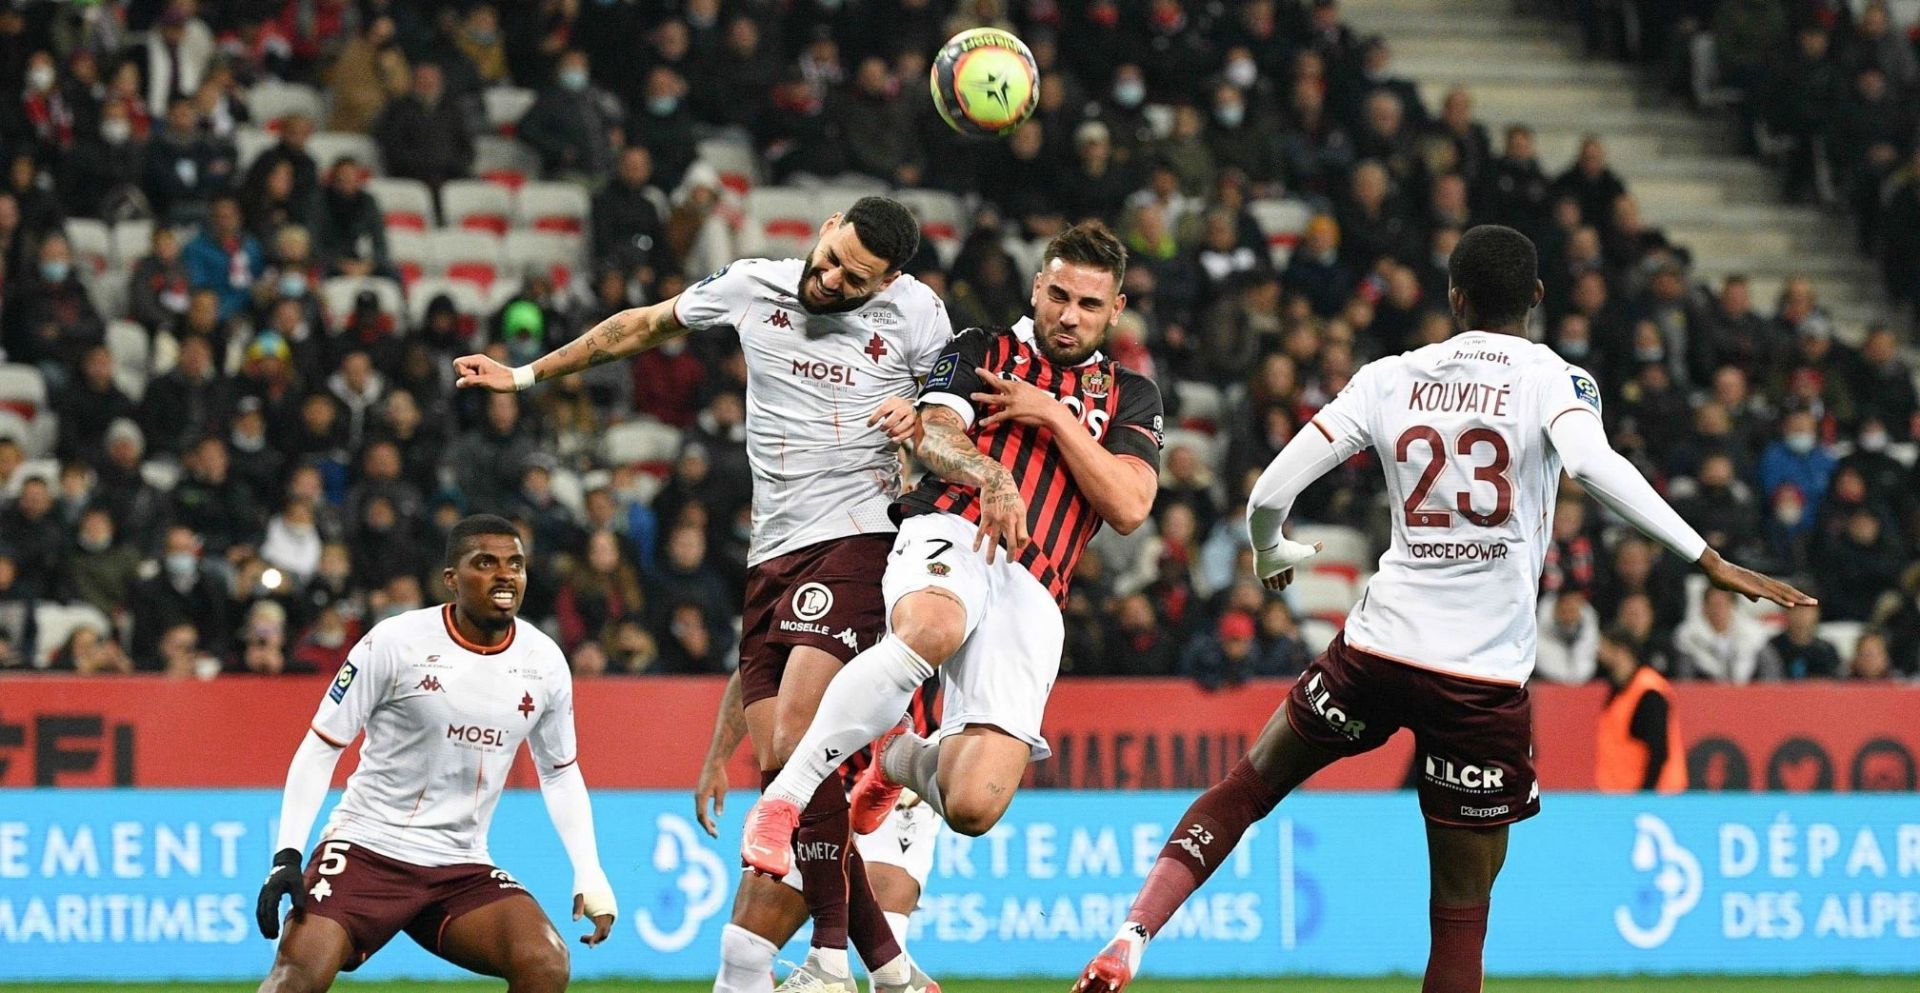 Metz and Nice square off in their Ligue 1 fixture on Sunday